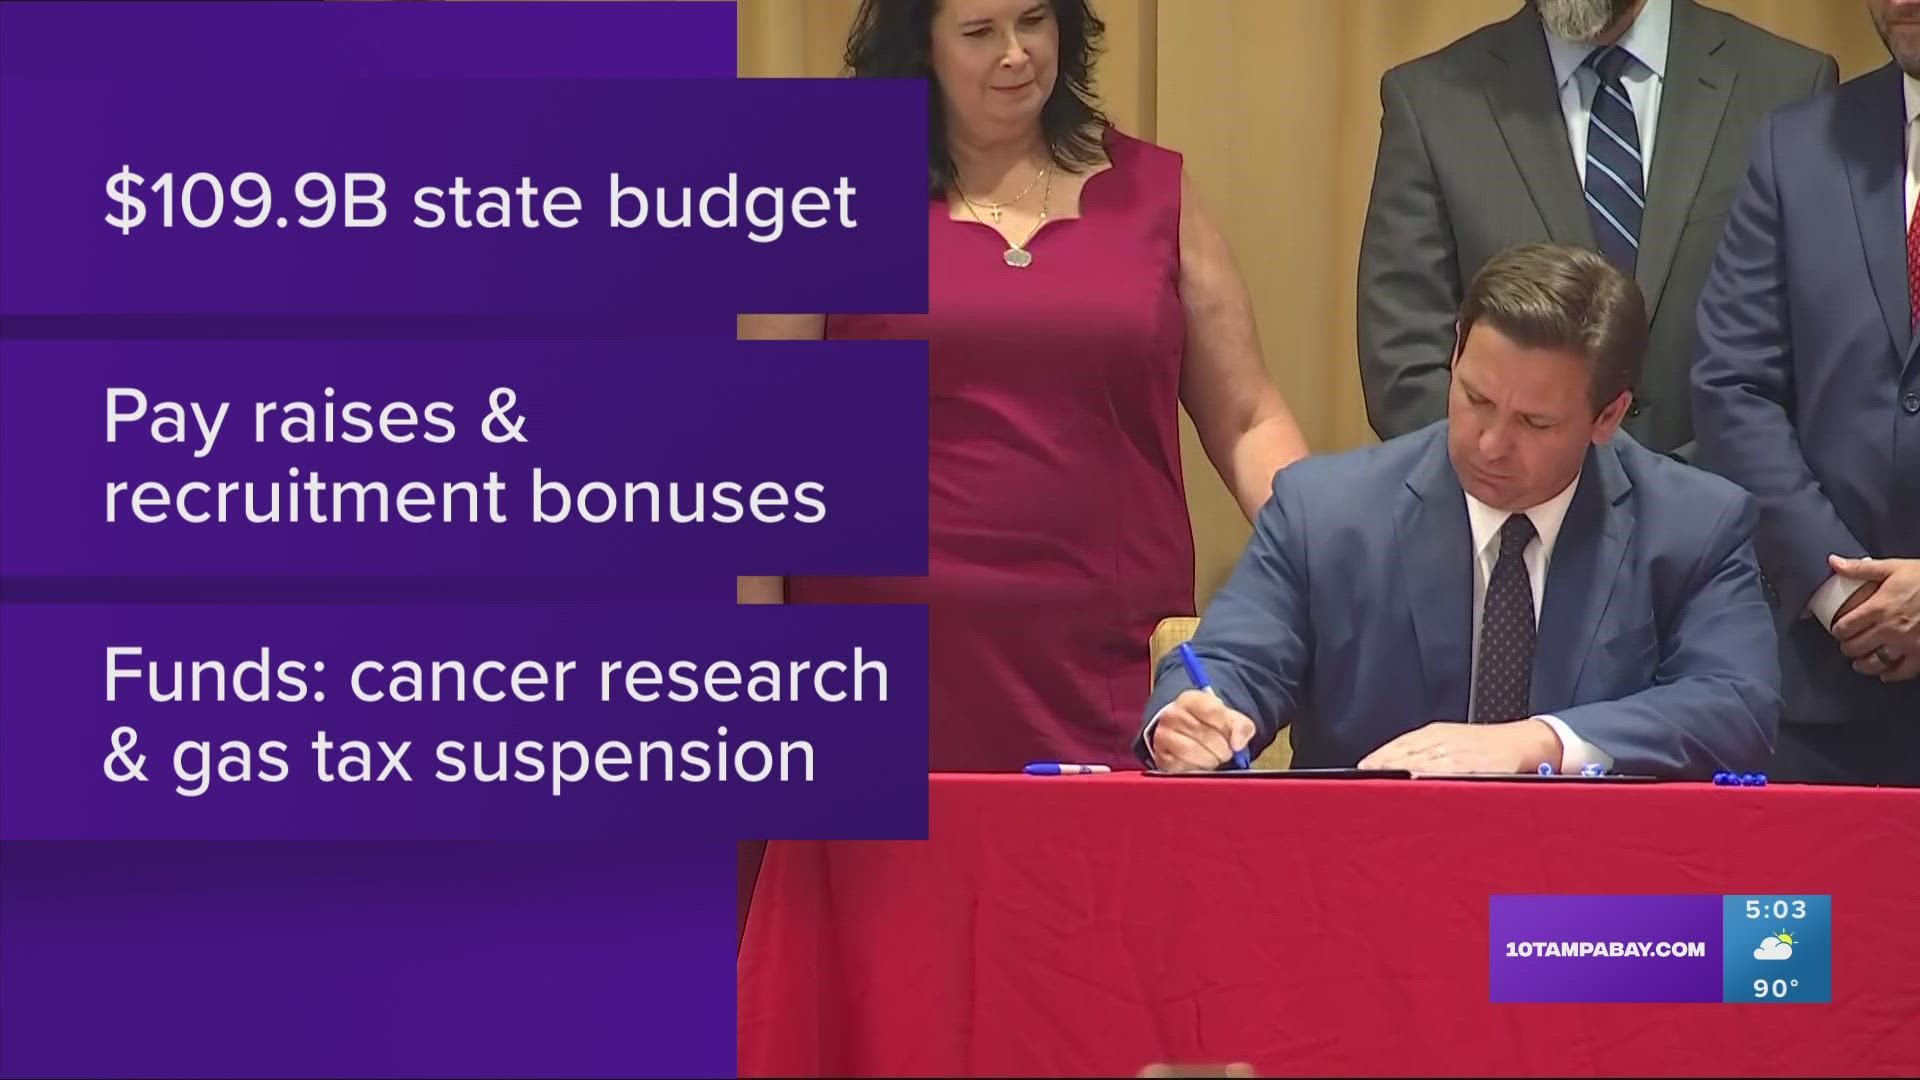 Some of the most notable measures in the budget include pay raises for state workers, bonuses for police officers and a gas tax holiday.